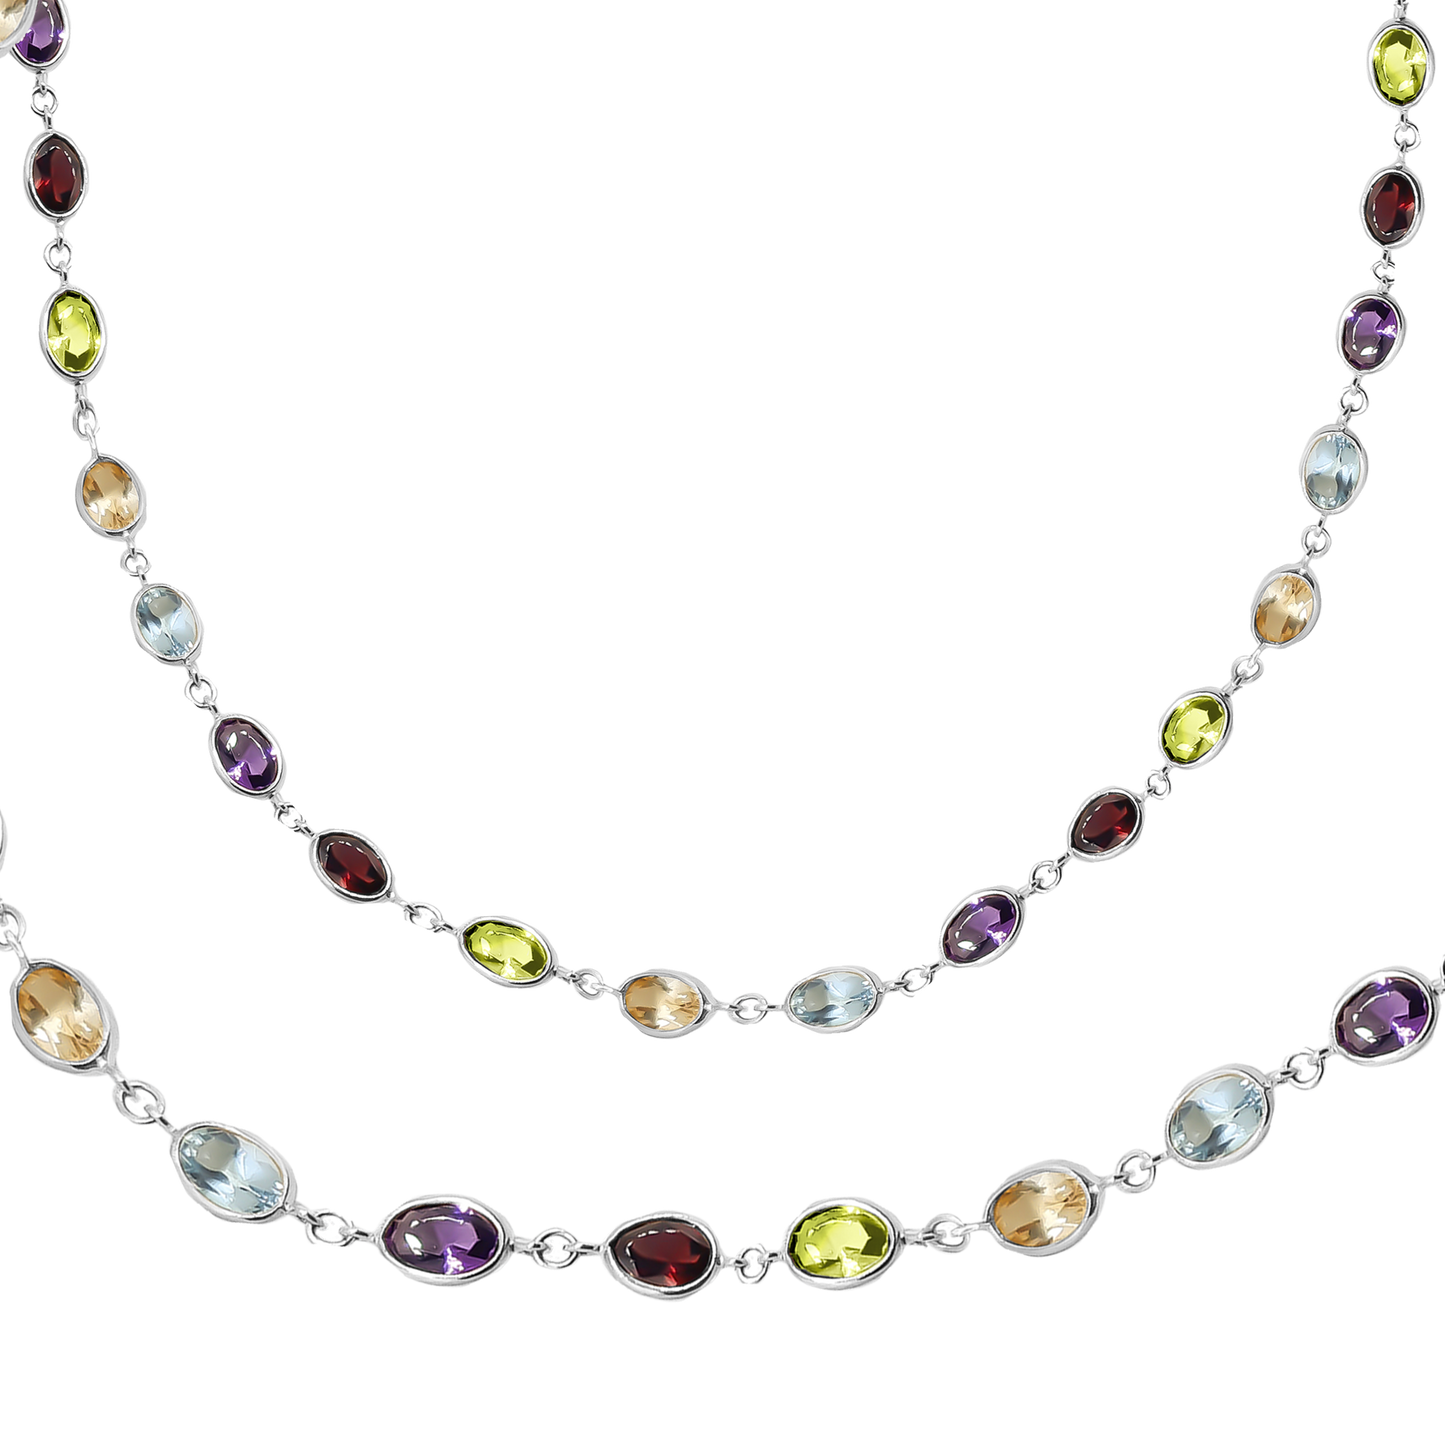 Tutti Frutti Oval Rounded Gemstone Necklace in 9ct Gold